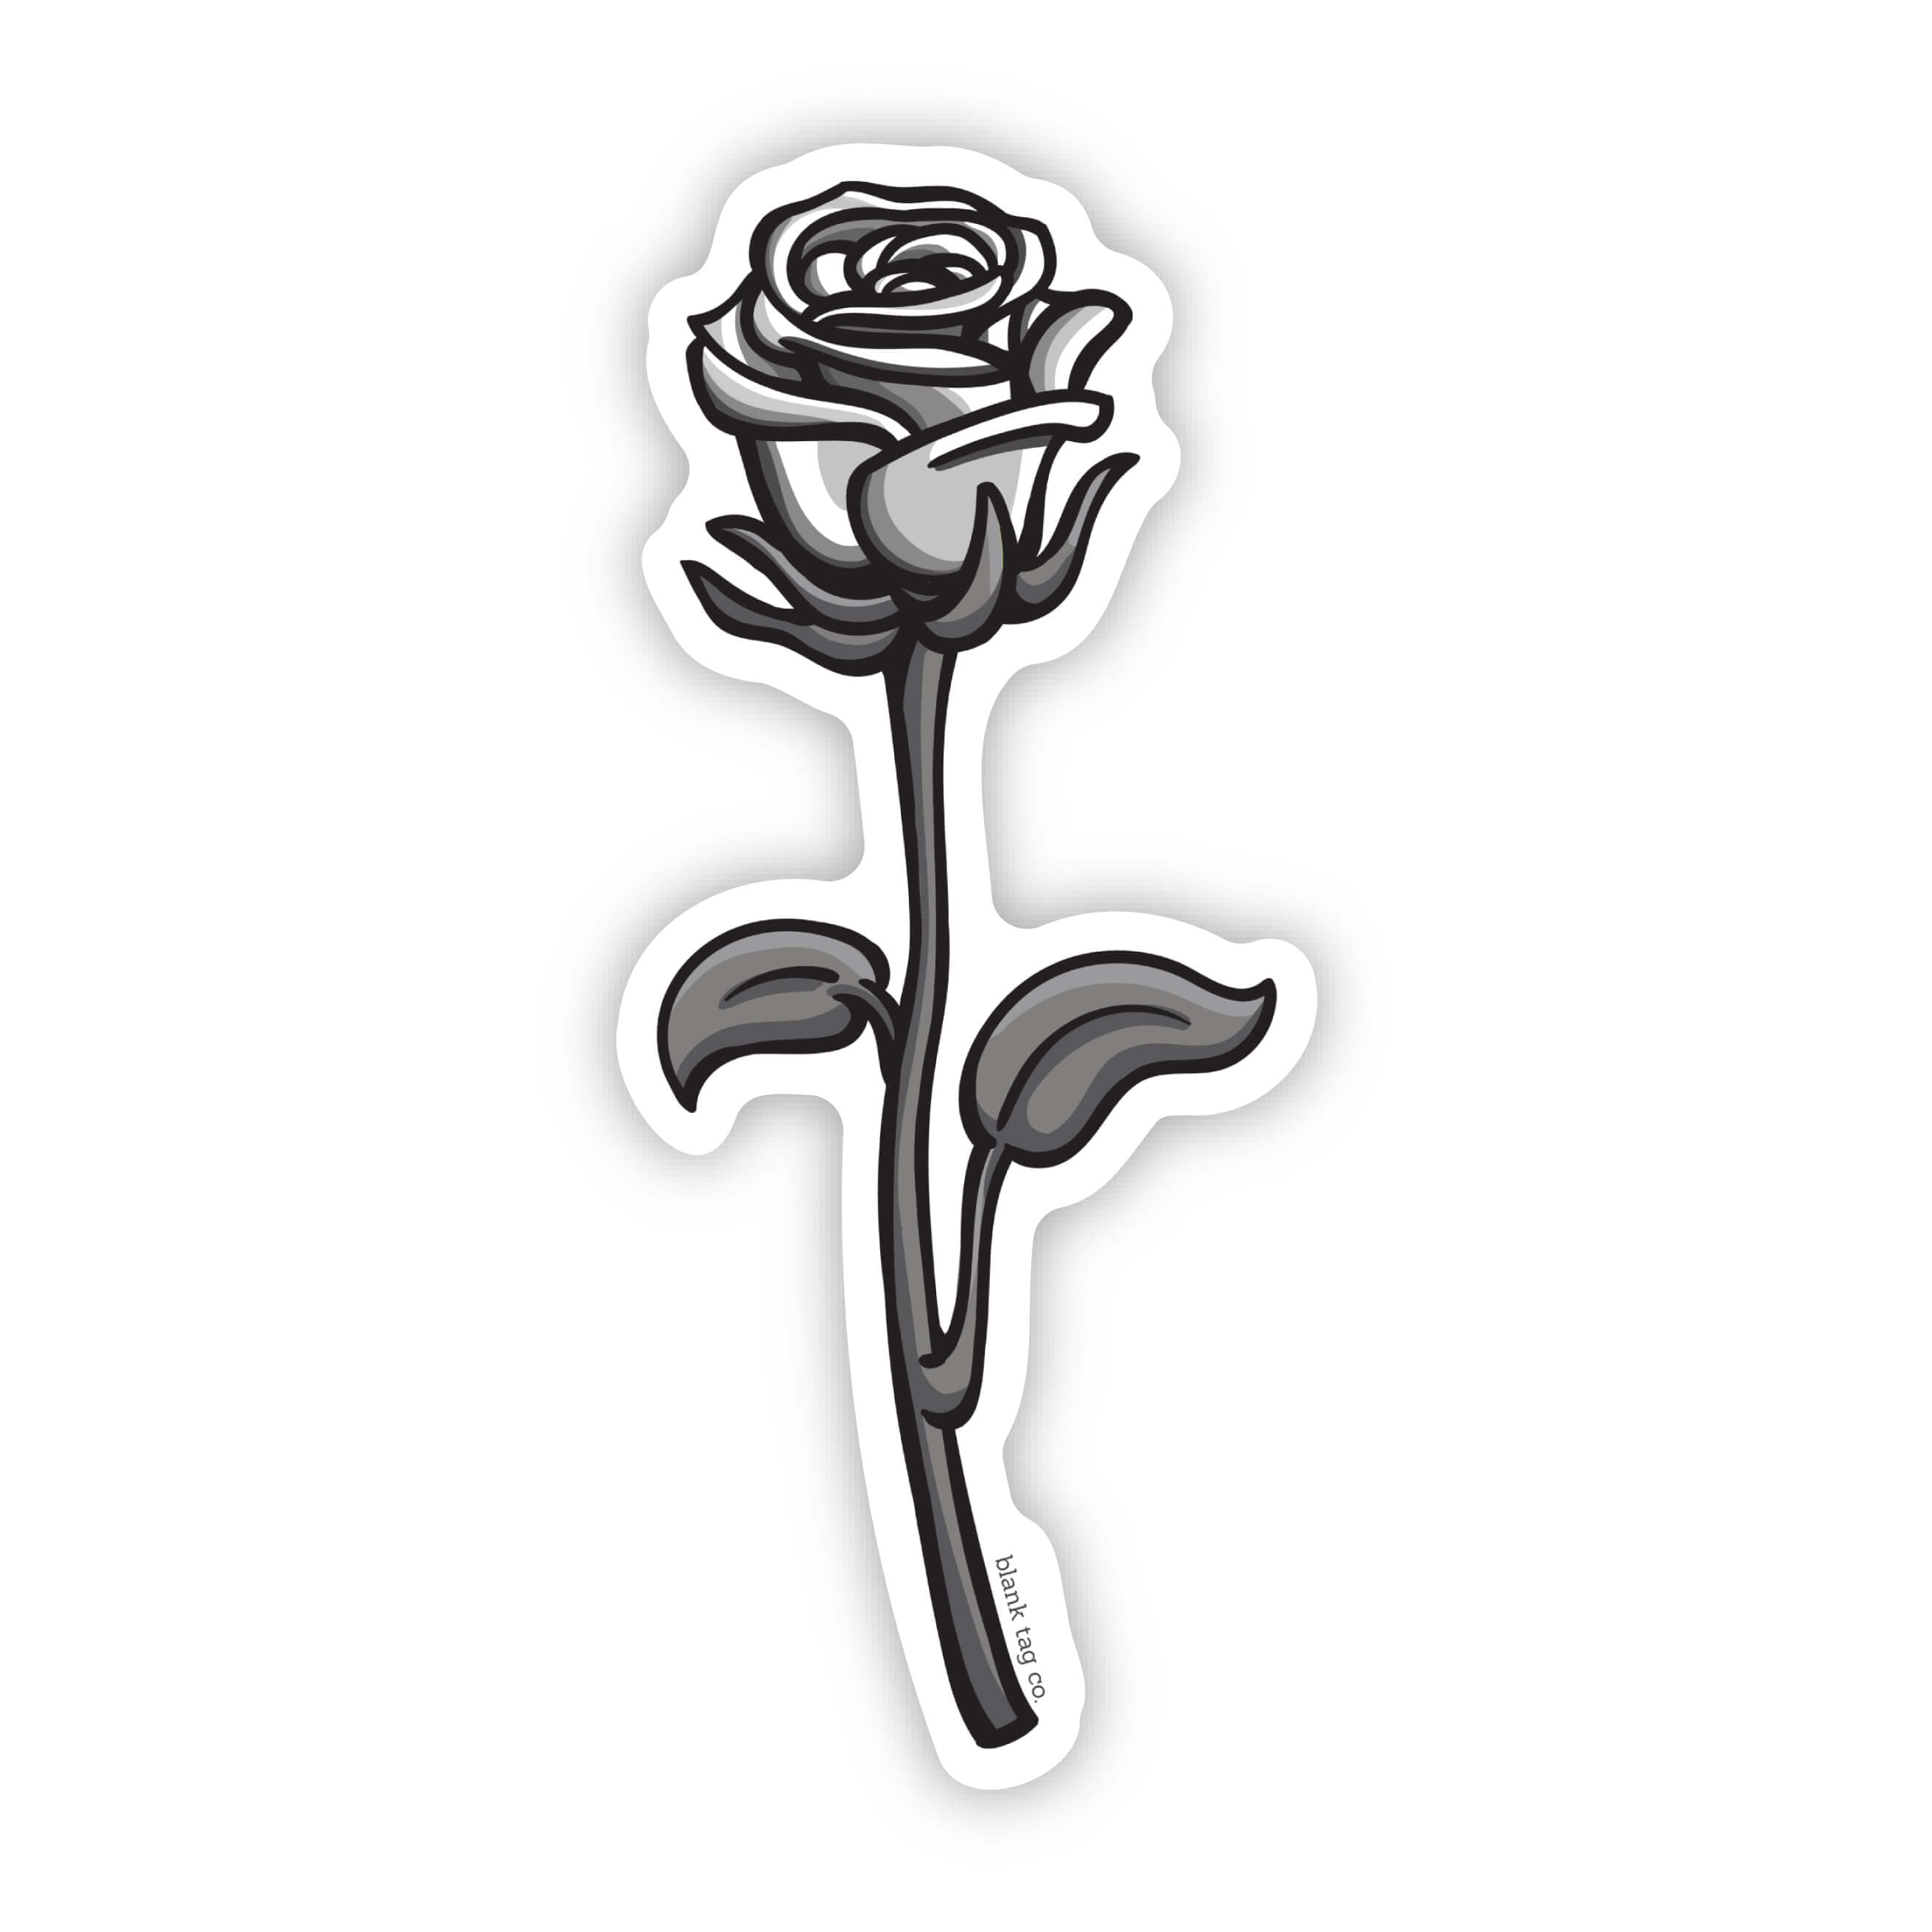 The Sexy Silver Rose